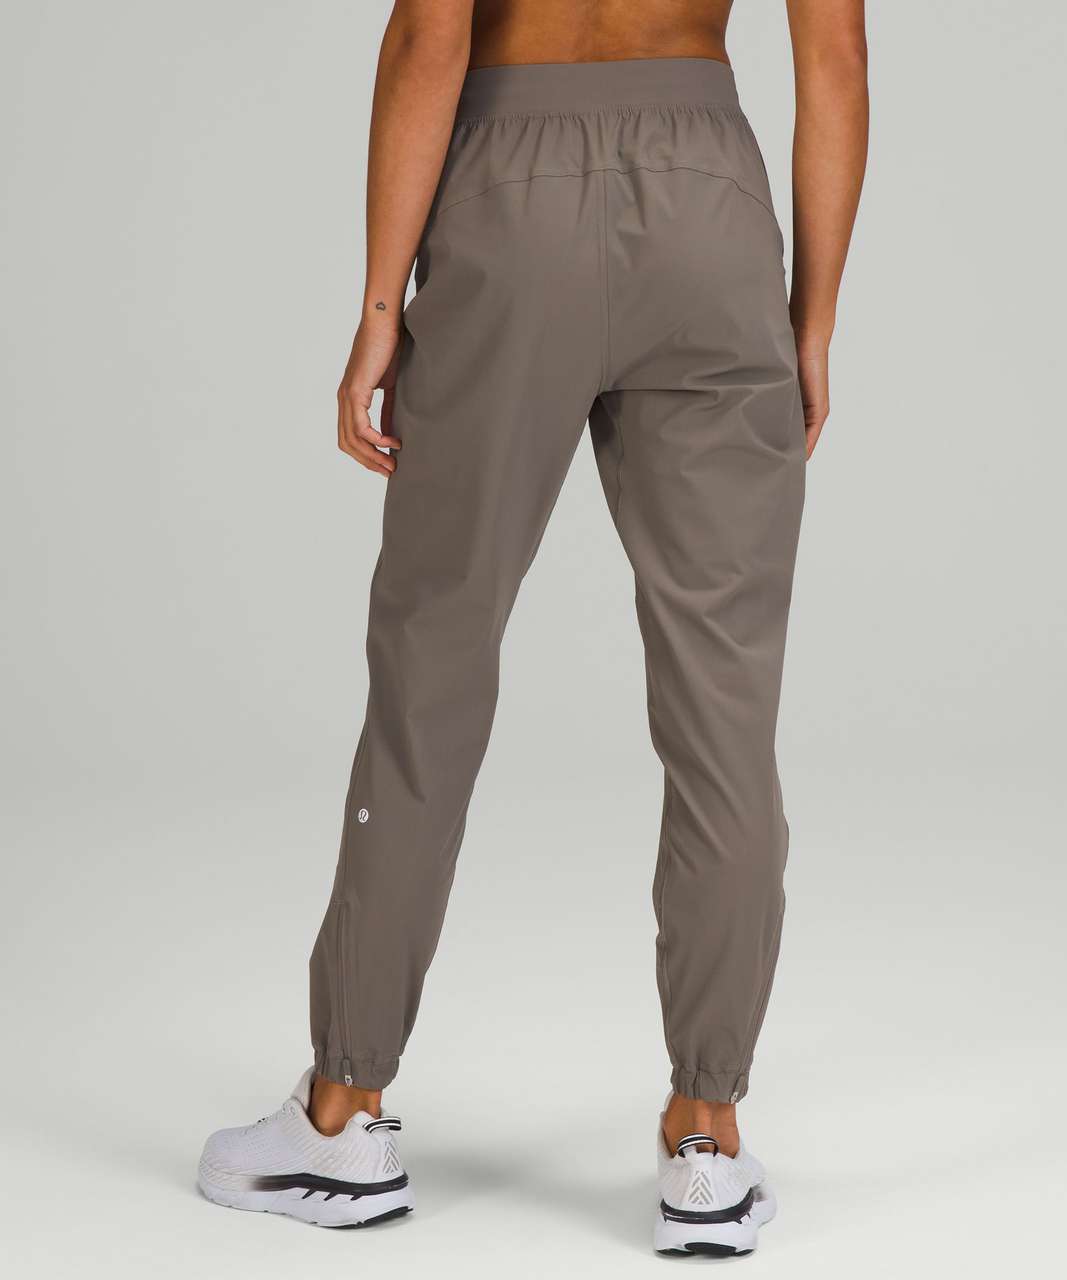 Lululemon Adapted State High-Rise Jogger - Rover